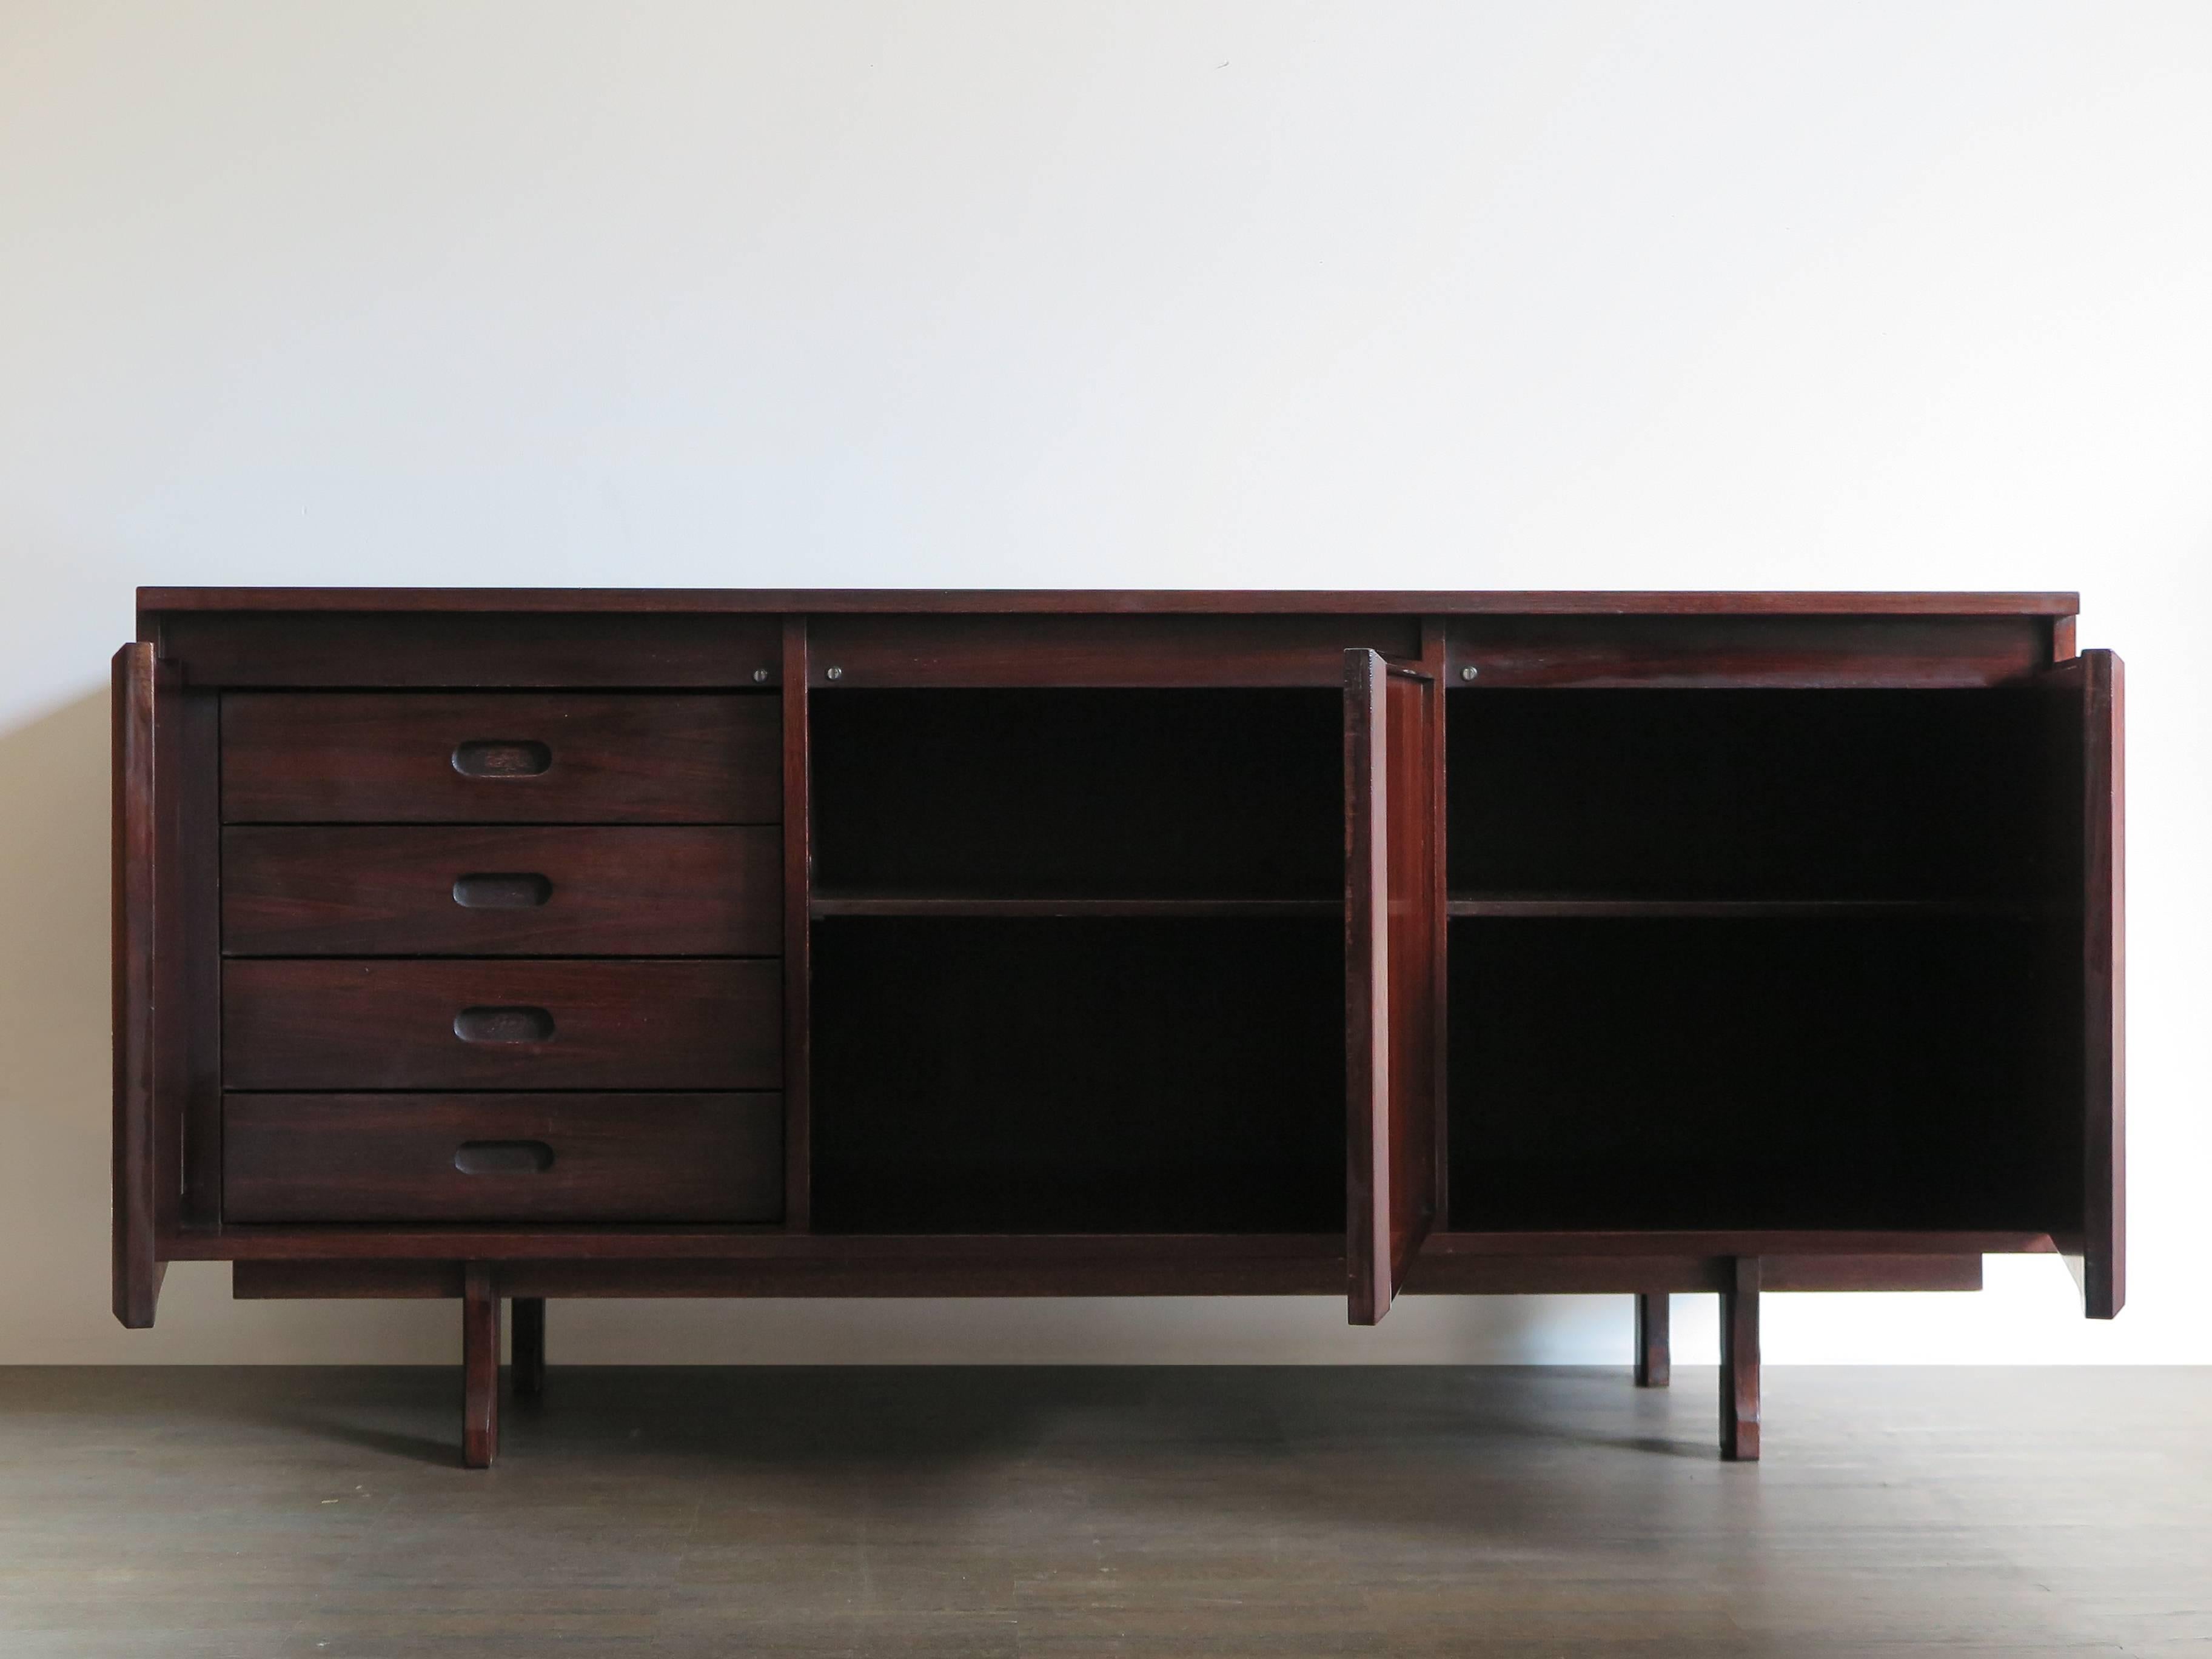 Italian rosewood sideboard from the sixties by Giovanni Ausenda for Stilwood, it is finished on the back so it can be used as room divider, midcentury design.
Bibliography: Abitare 58 (October 1967), advertising.